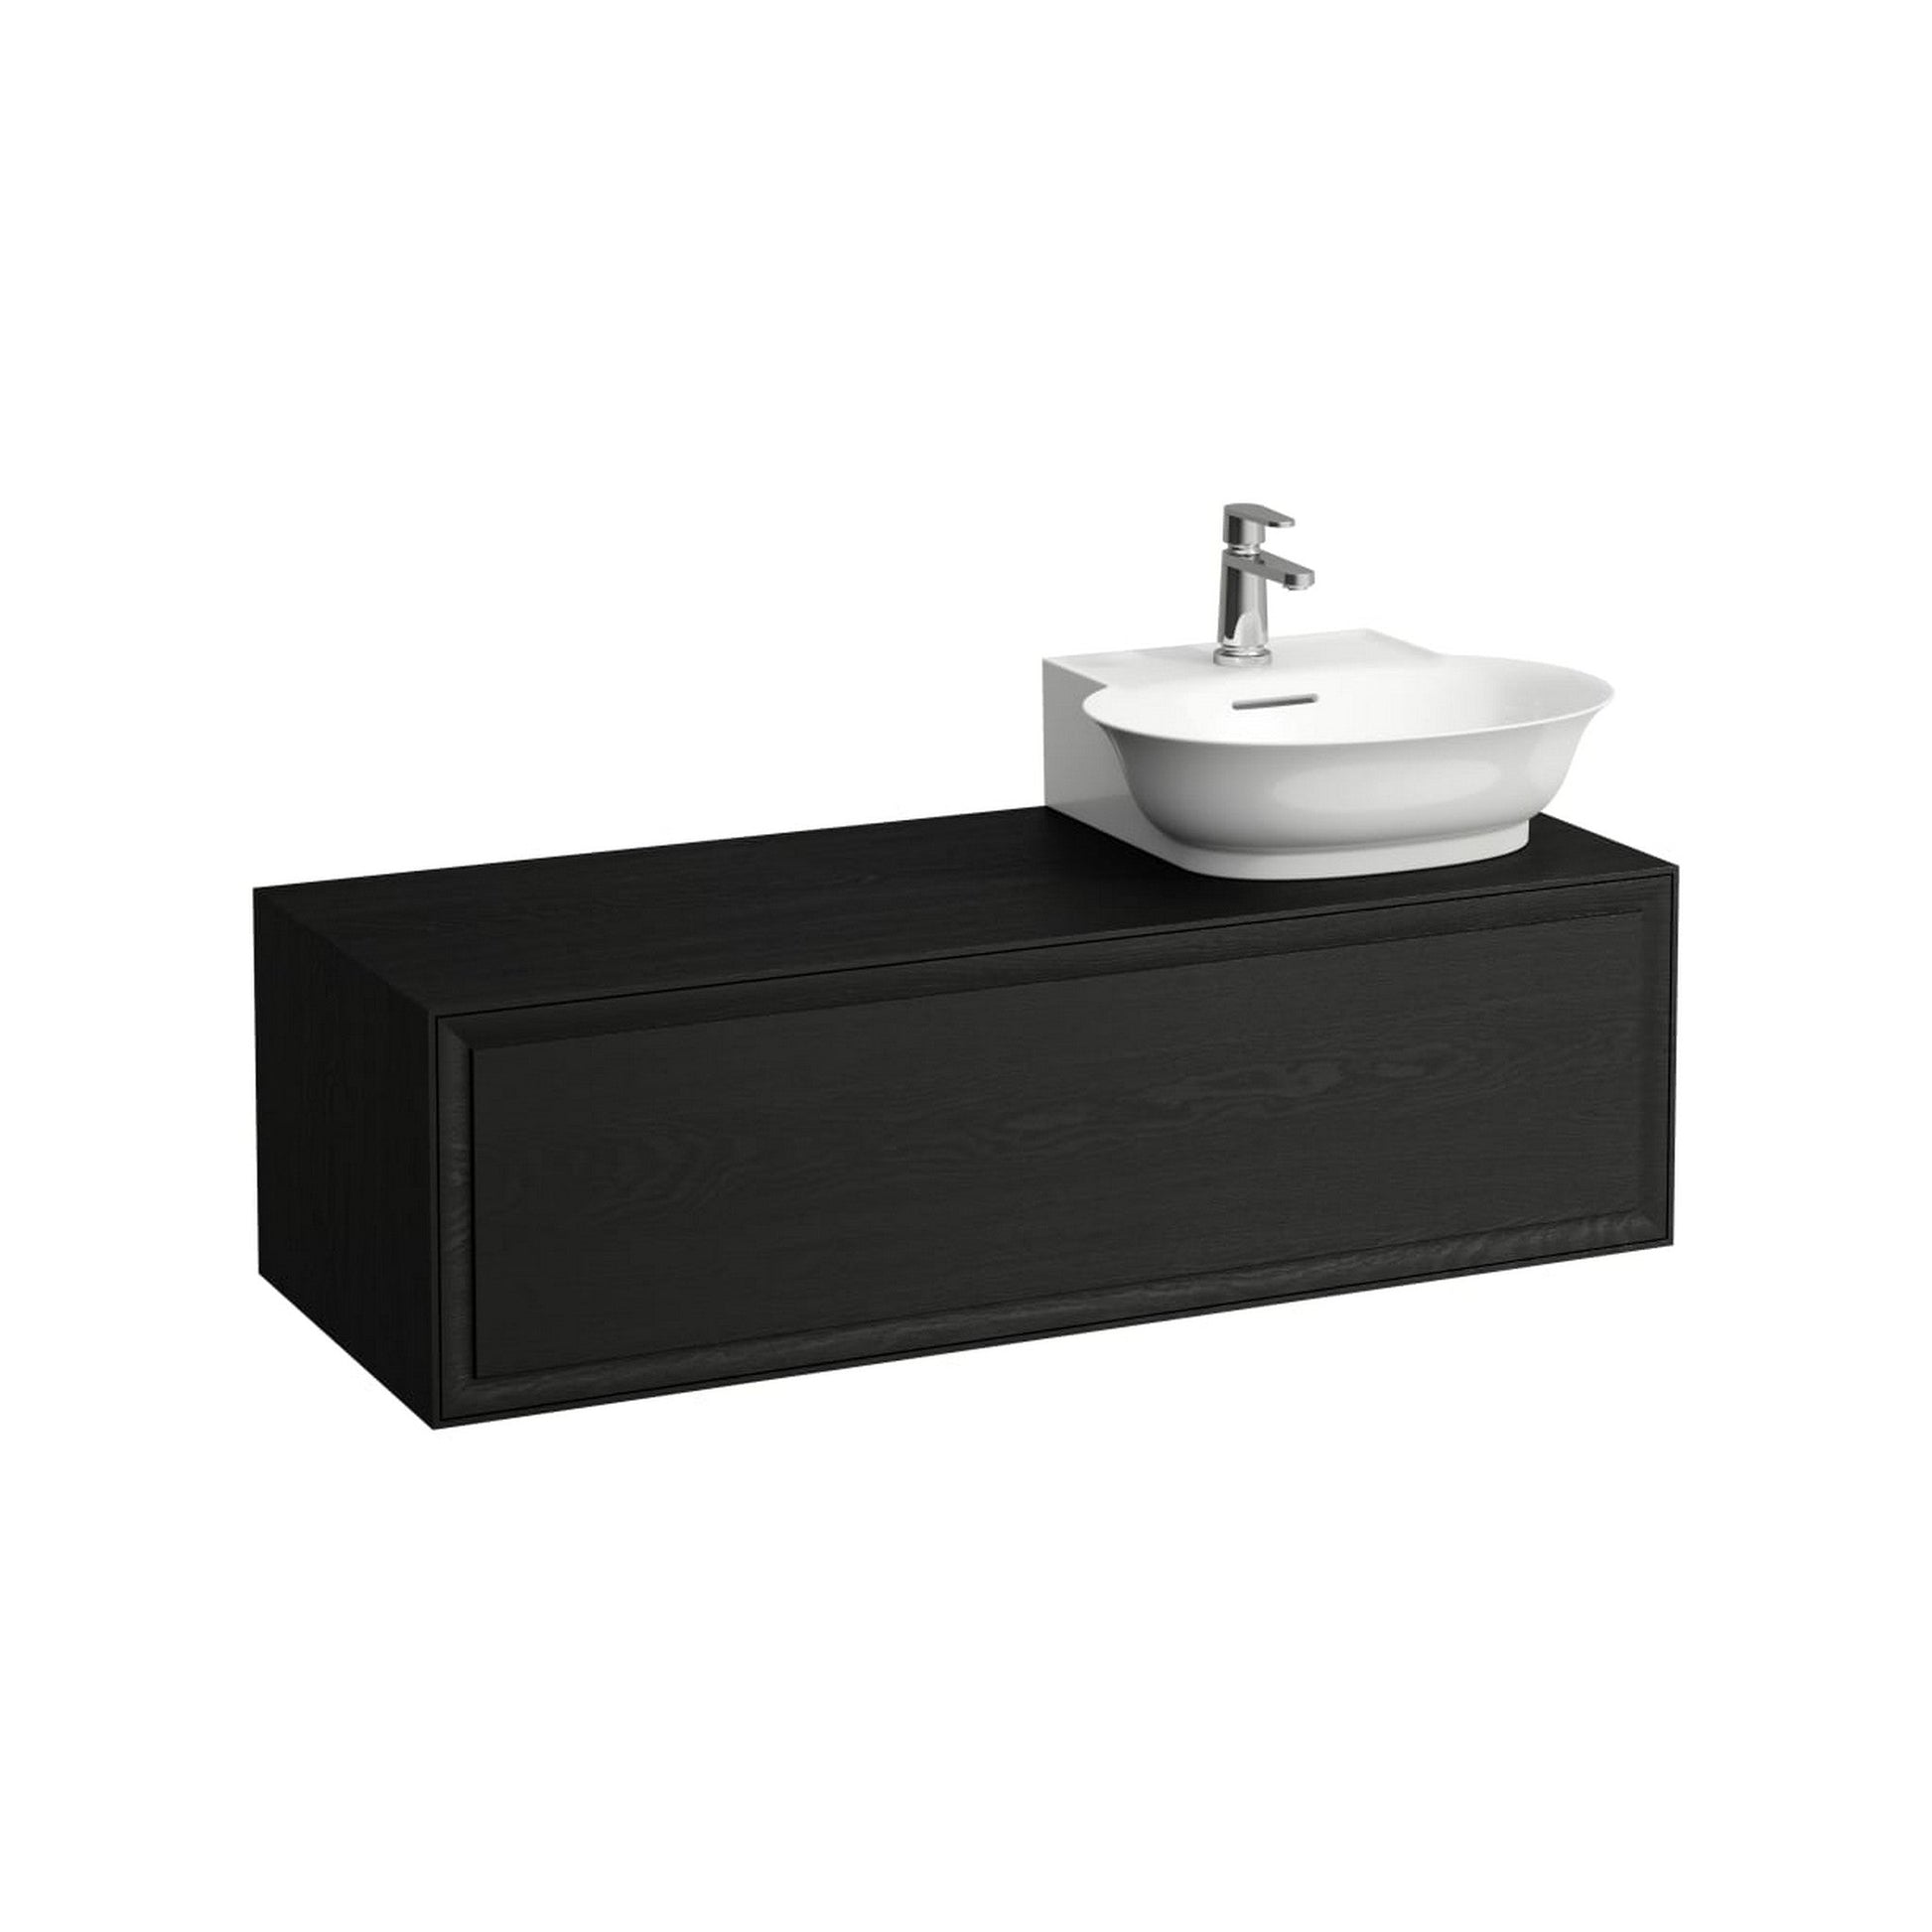 Laufen New Classic 46" 1-Drawer Blacked Oak Wall-Mounted Vanity With Sink Cut-out on the Right for New Classic Bathroom Sink Model: H816852